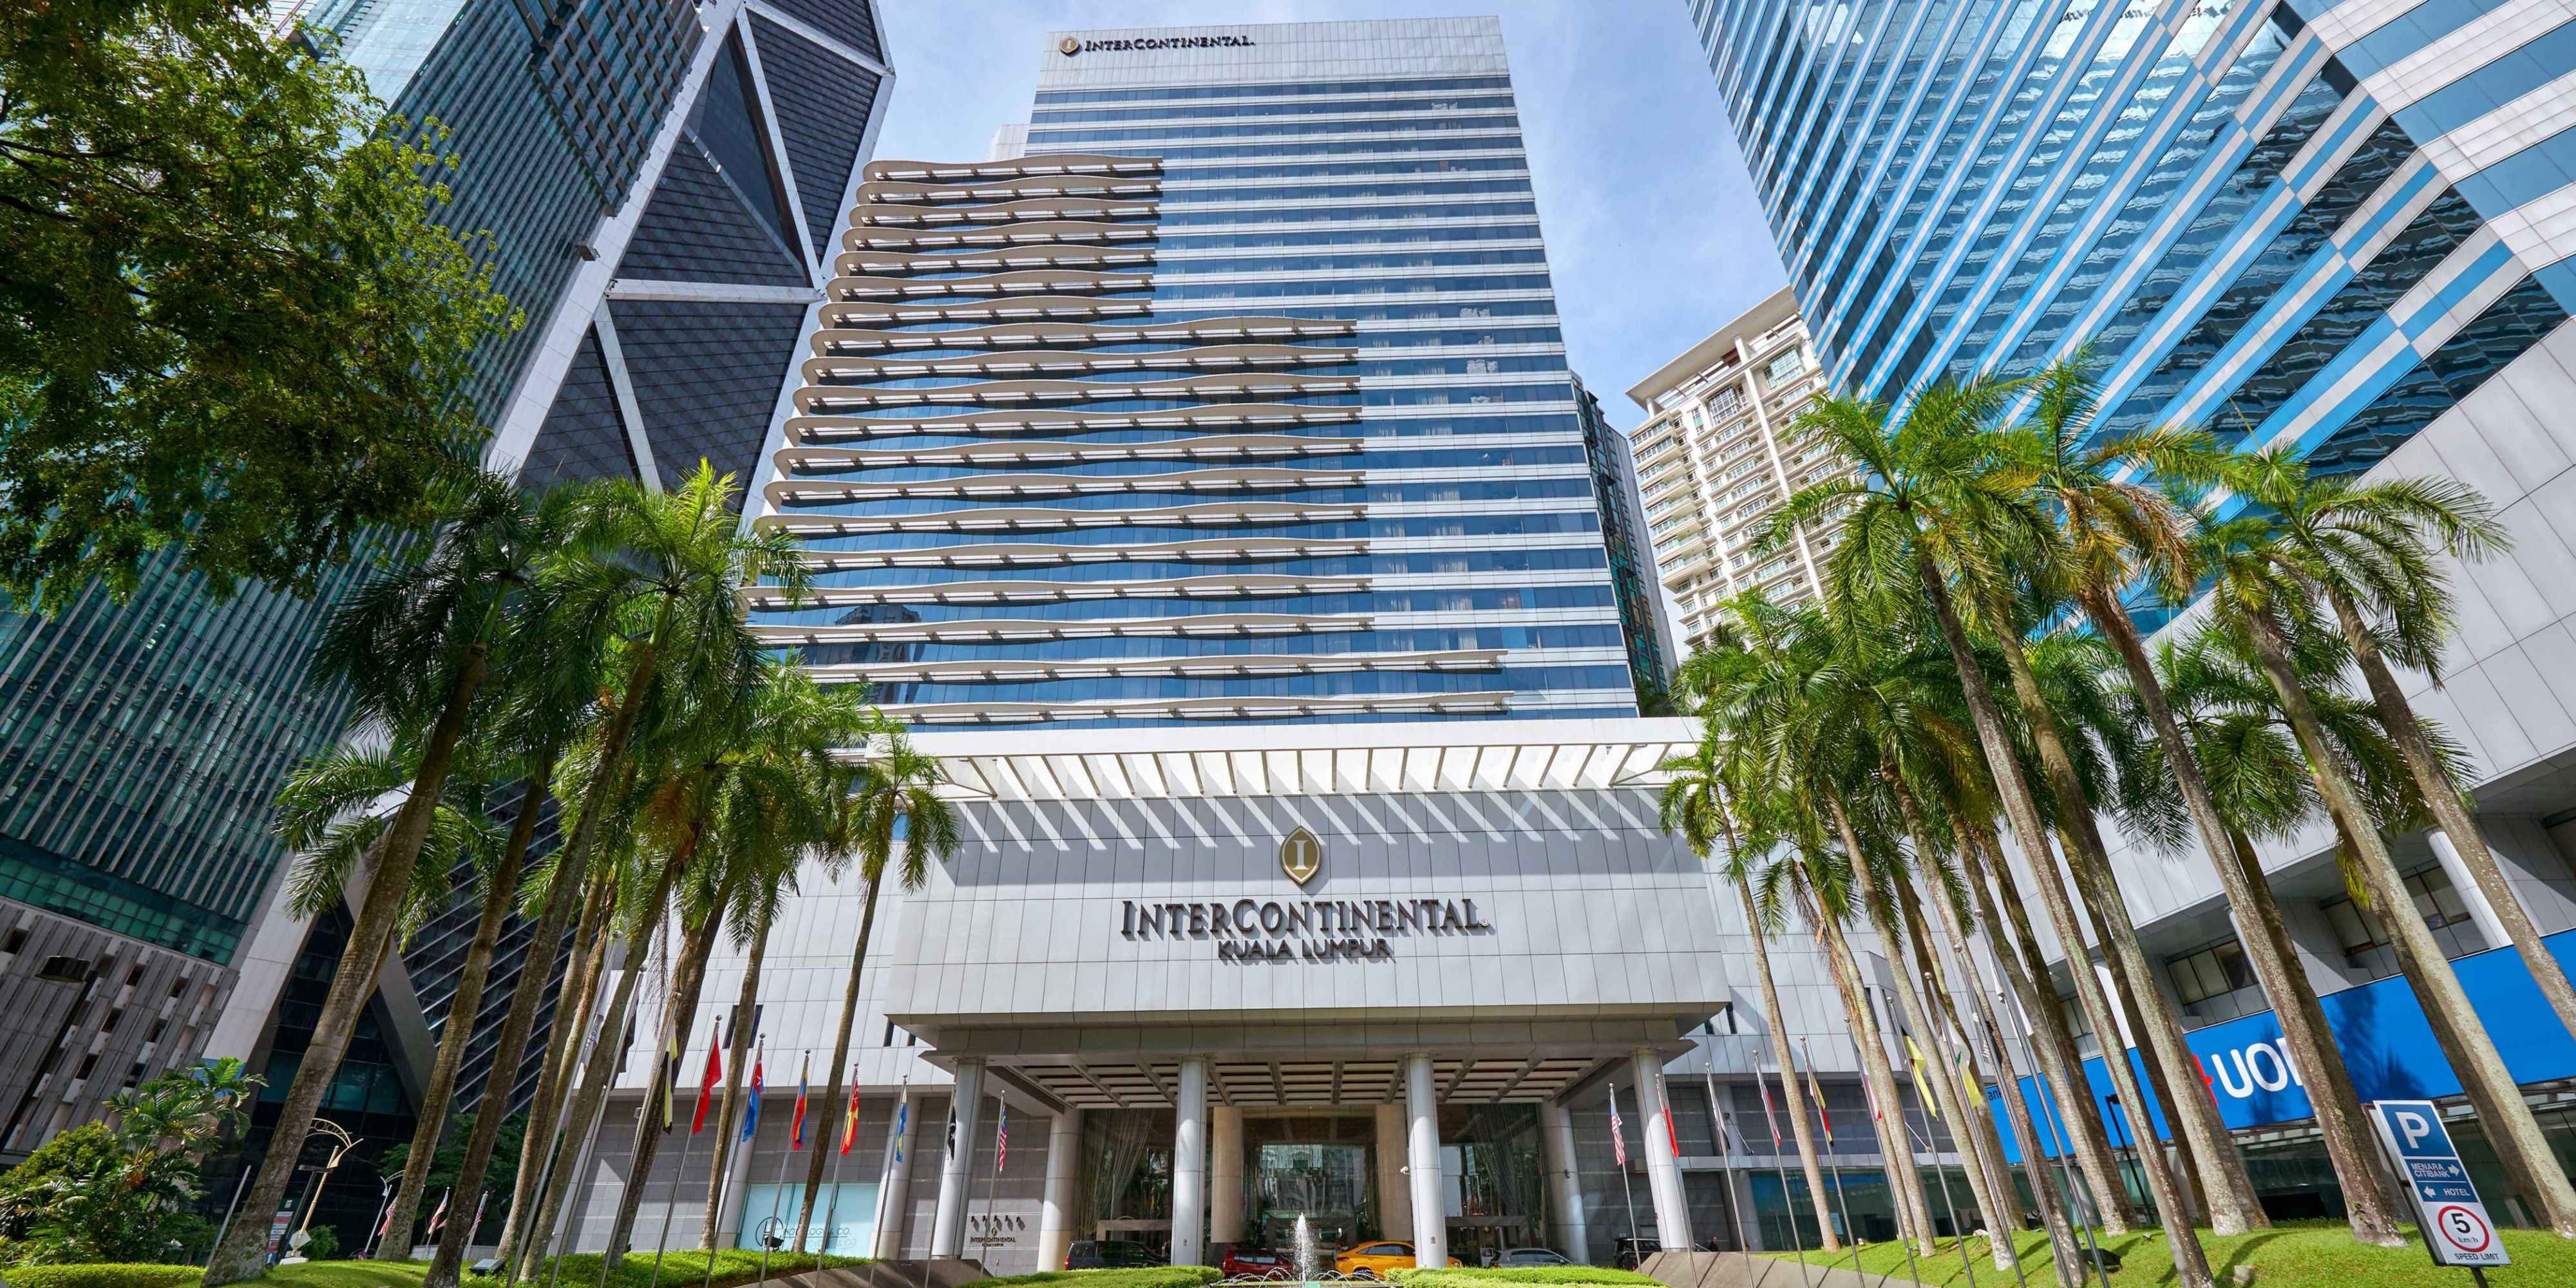 InterContinental Kuala Lumpur is expanding its commitment to the highest levels of cleanliness standards through its IHG Clean Promise. Enjoy peace of mind throughout your stay with clean, well-maintained, clutter-free rooms. We have also been awarded with the "Clean & Safe" Malaysia Certification from Bureau Veritas Certification Malaysia.